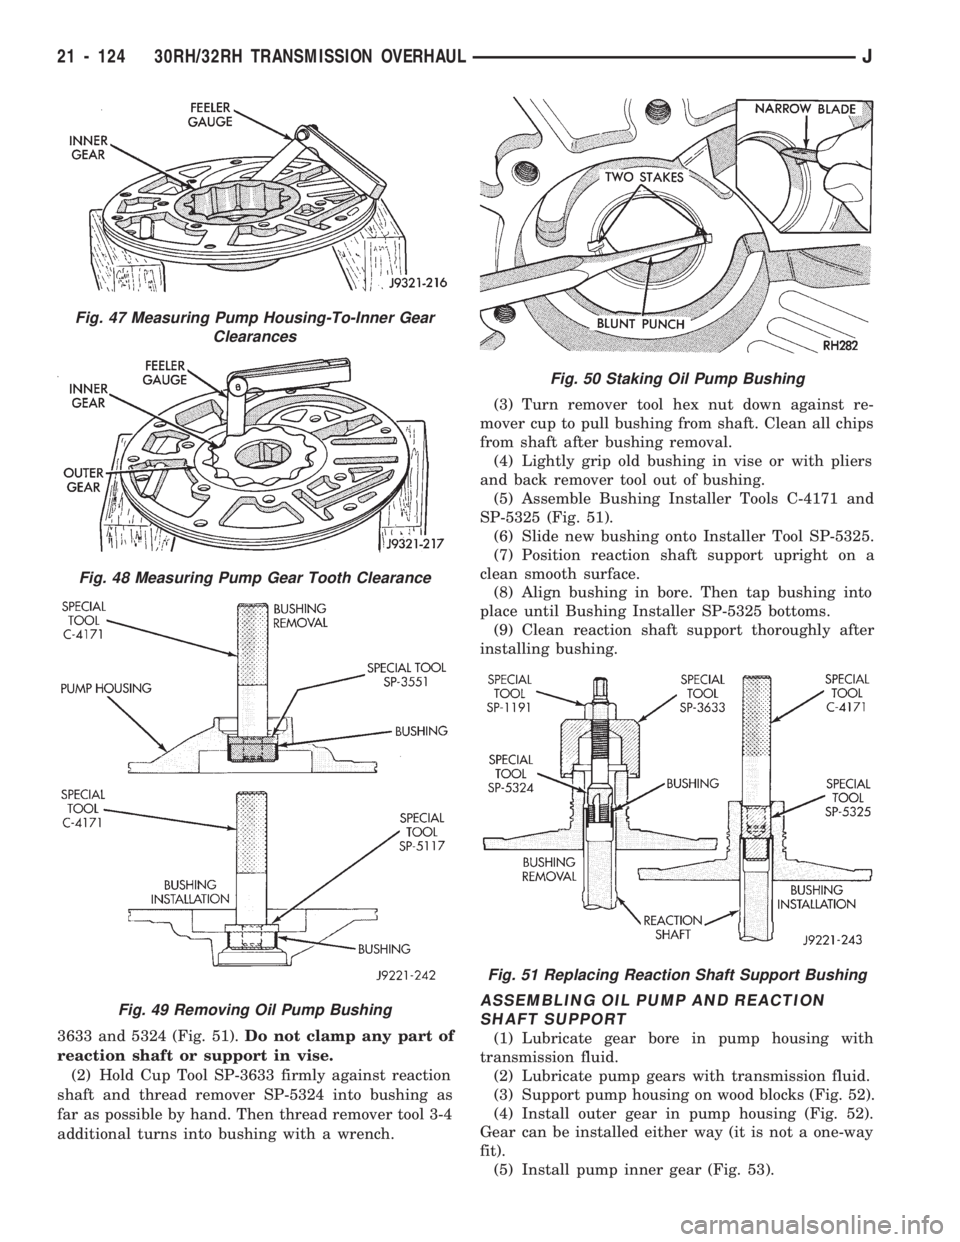 JEEP WRANGLER 1994  Owners Manual Fig. 48 Measuring Pump Gear Tooth Clearance
Fig. 49 Removing Oil Pump Bushing
Fig. 50 Staking Oil Pump Bushing
Fig. 51 Replacing Reaction Shaft Support Bushing
21 - 124 30RH/32RH TRANSMISSION OVERHAUL